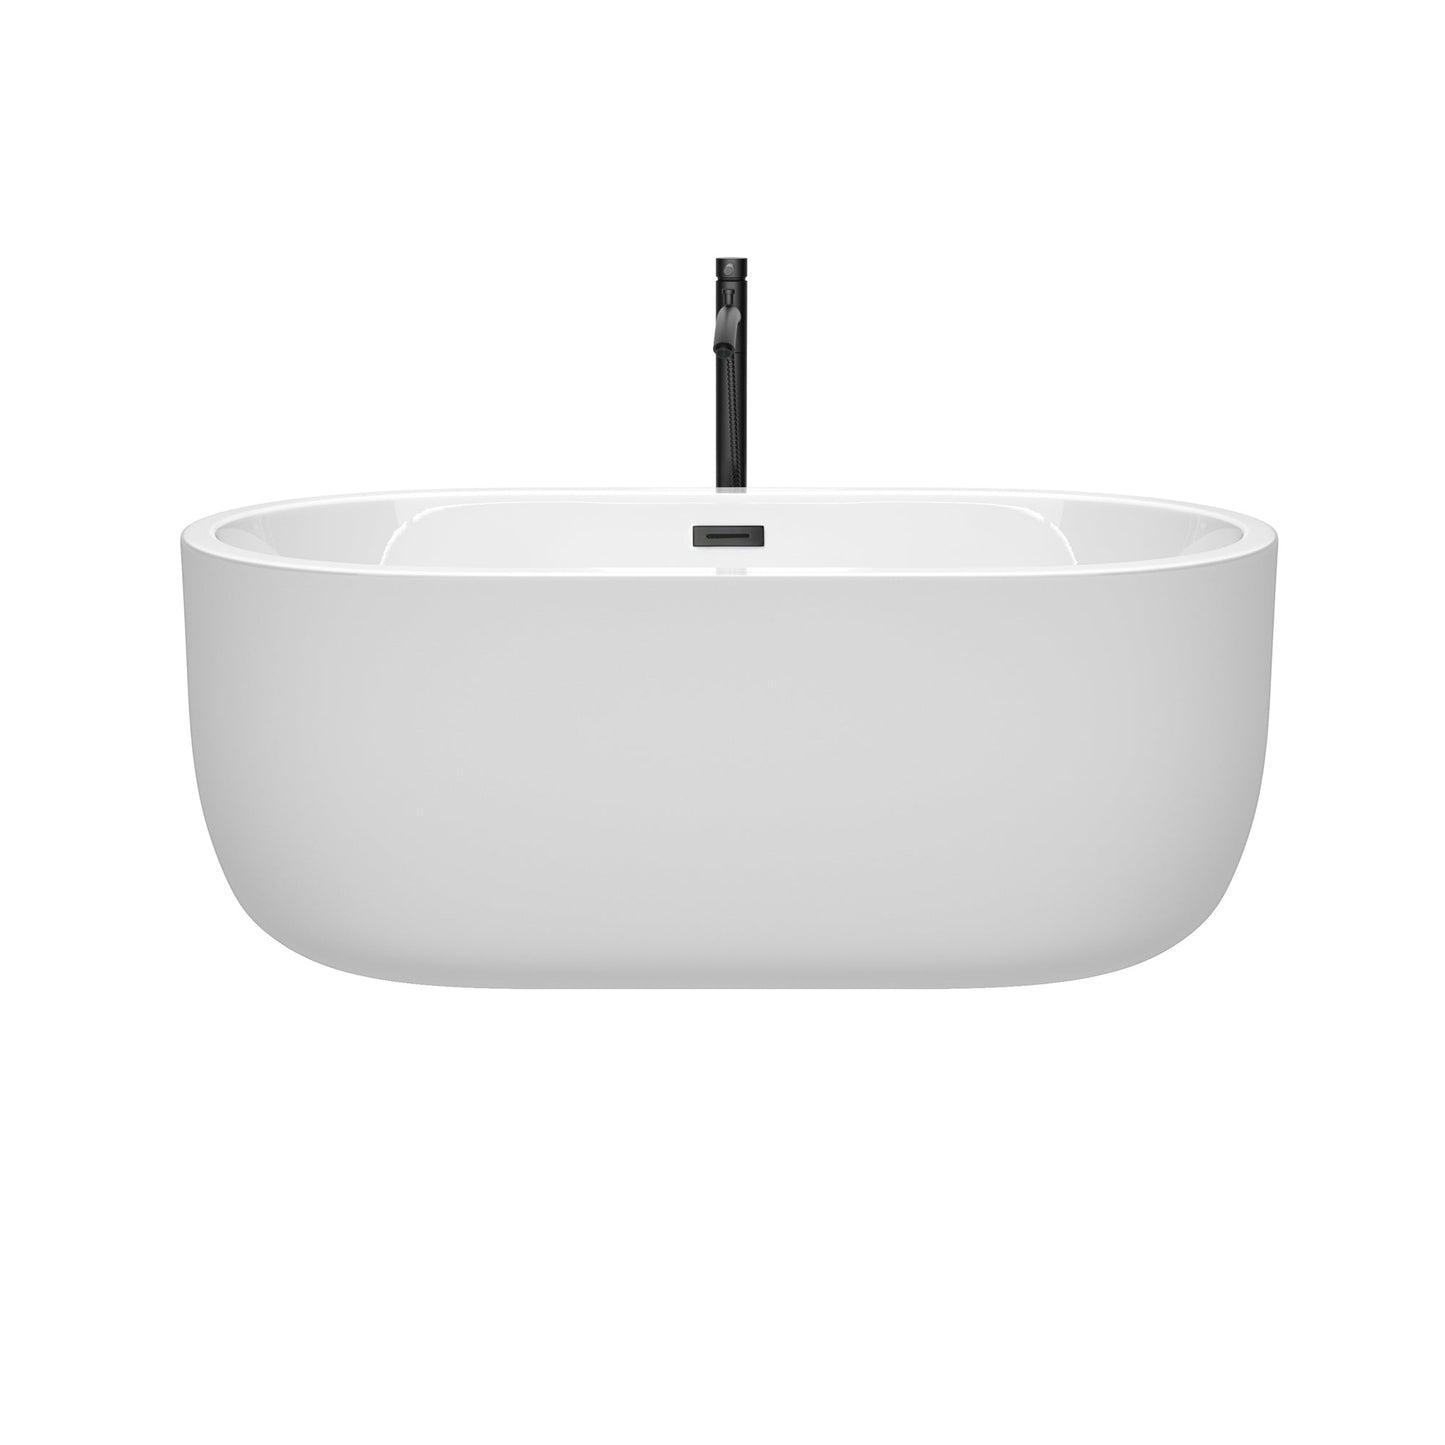 Wyndham Collection Juliette 60" Freestanding Bathtub in White With Floor Mounted Faucet, Drain and Overflow Trim in Matte Black